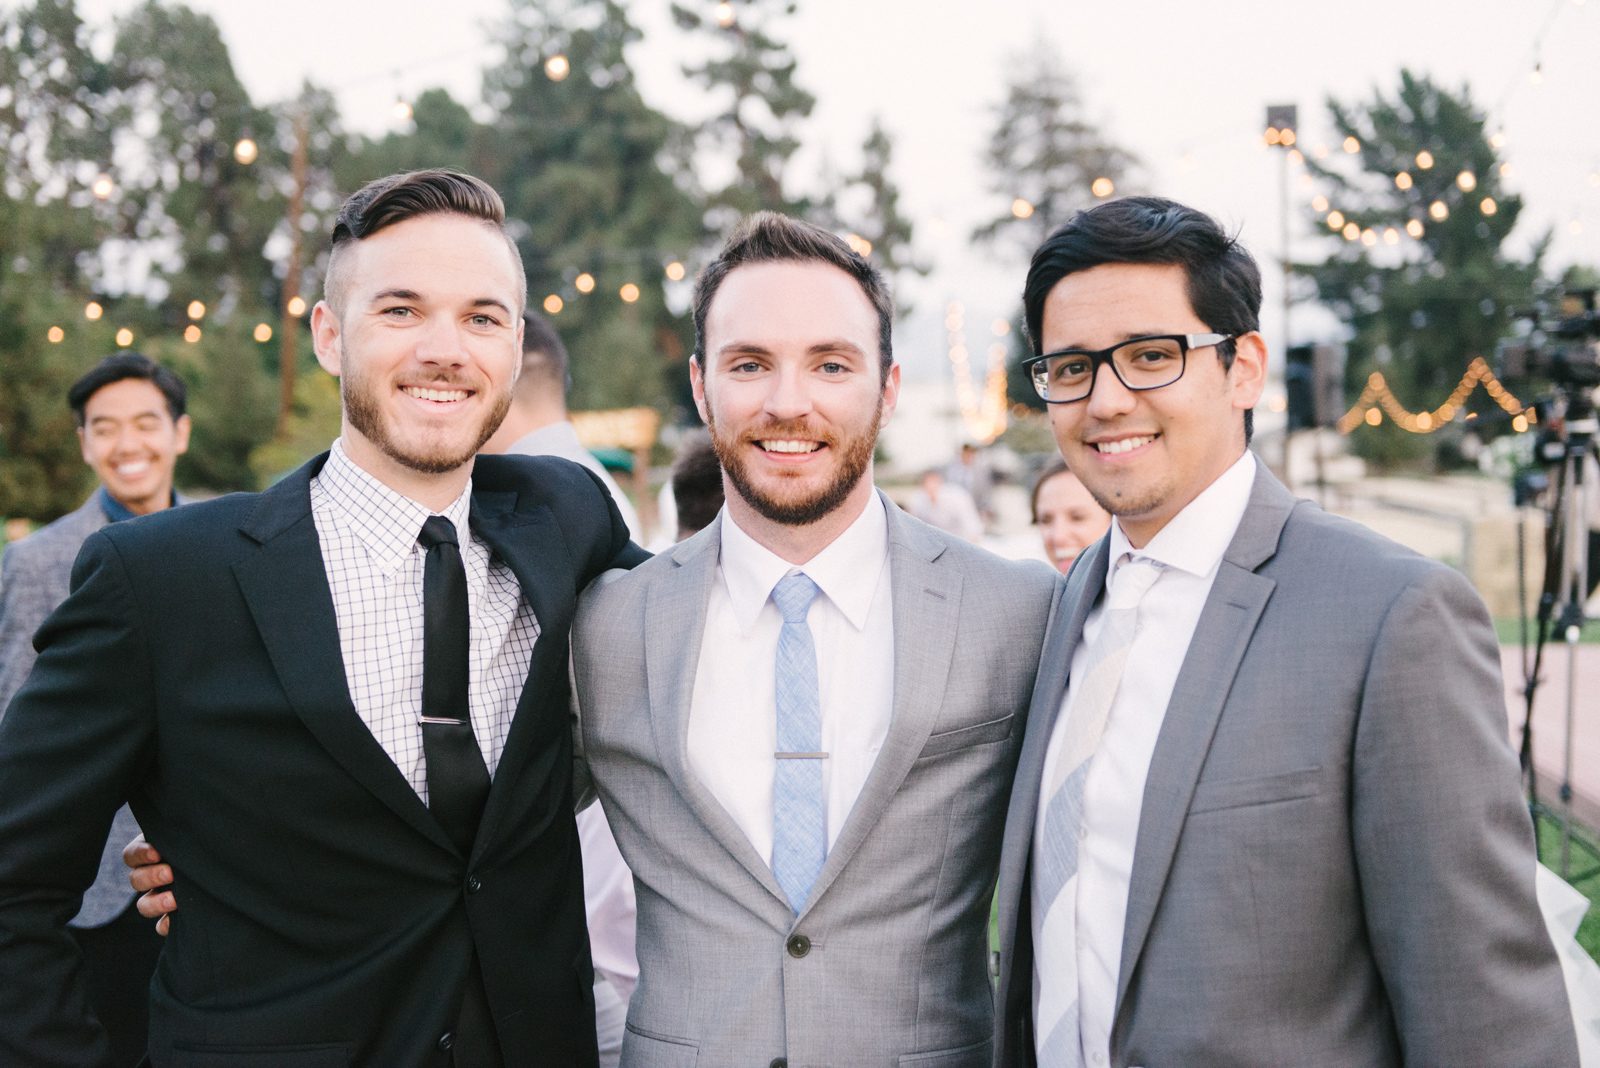 Groom with friends at Limoneira Ranch Wedding by San Luis Obispo Wedding Photographer Yvonne Goll Photography